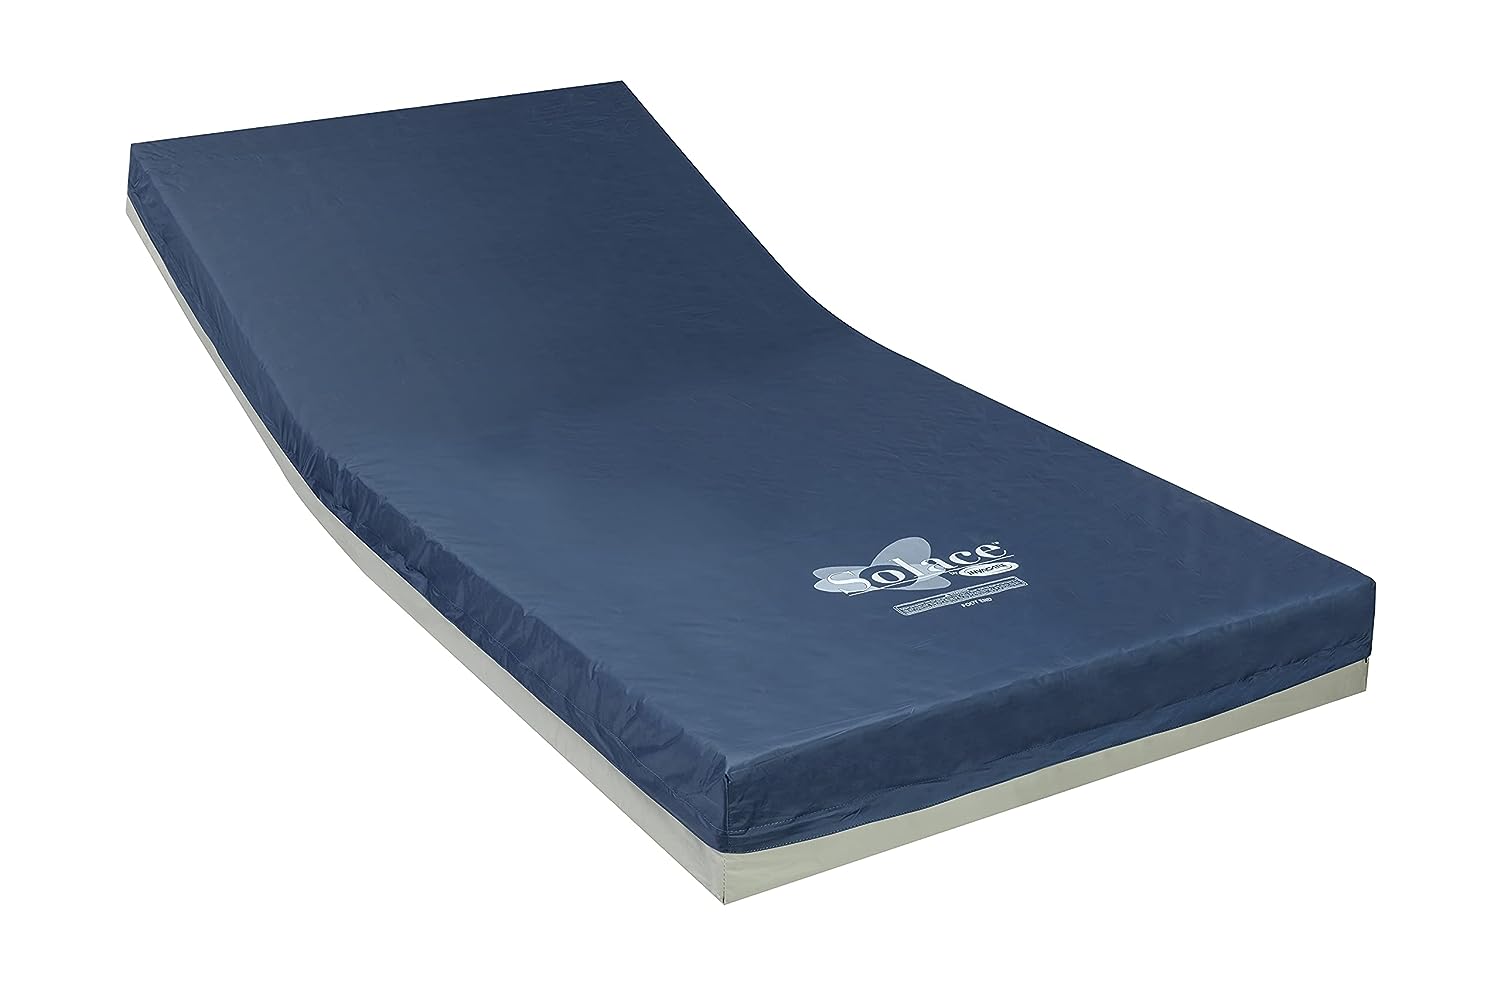 Invacare's Solace Prevention Hospital Bed Mattress, item number SPS1080 against a white background.